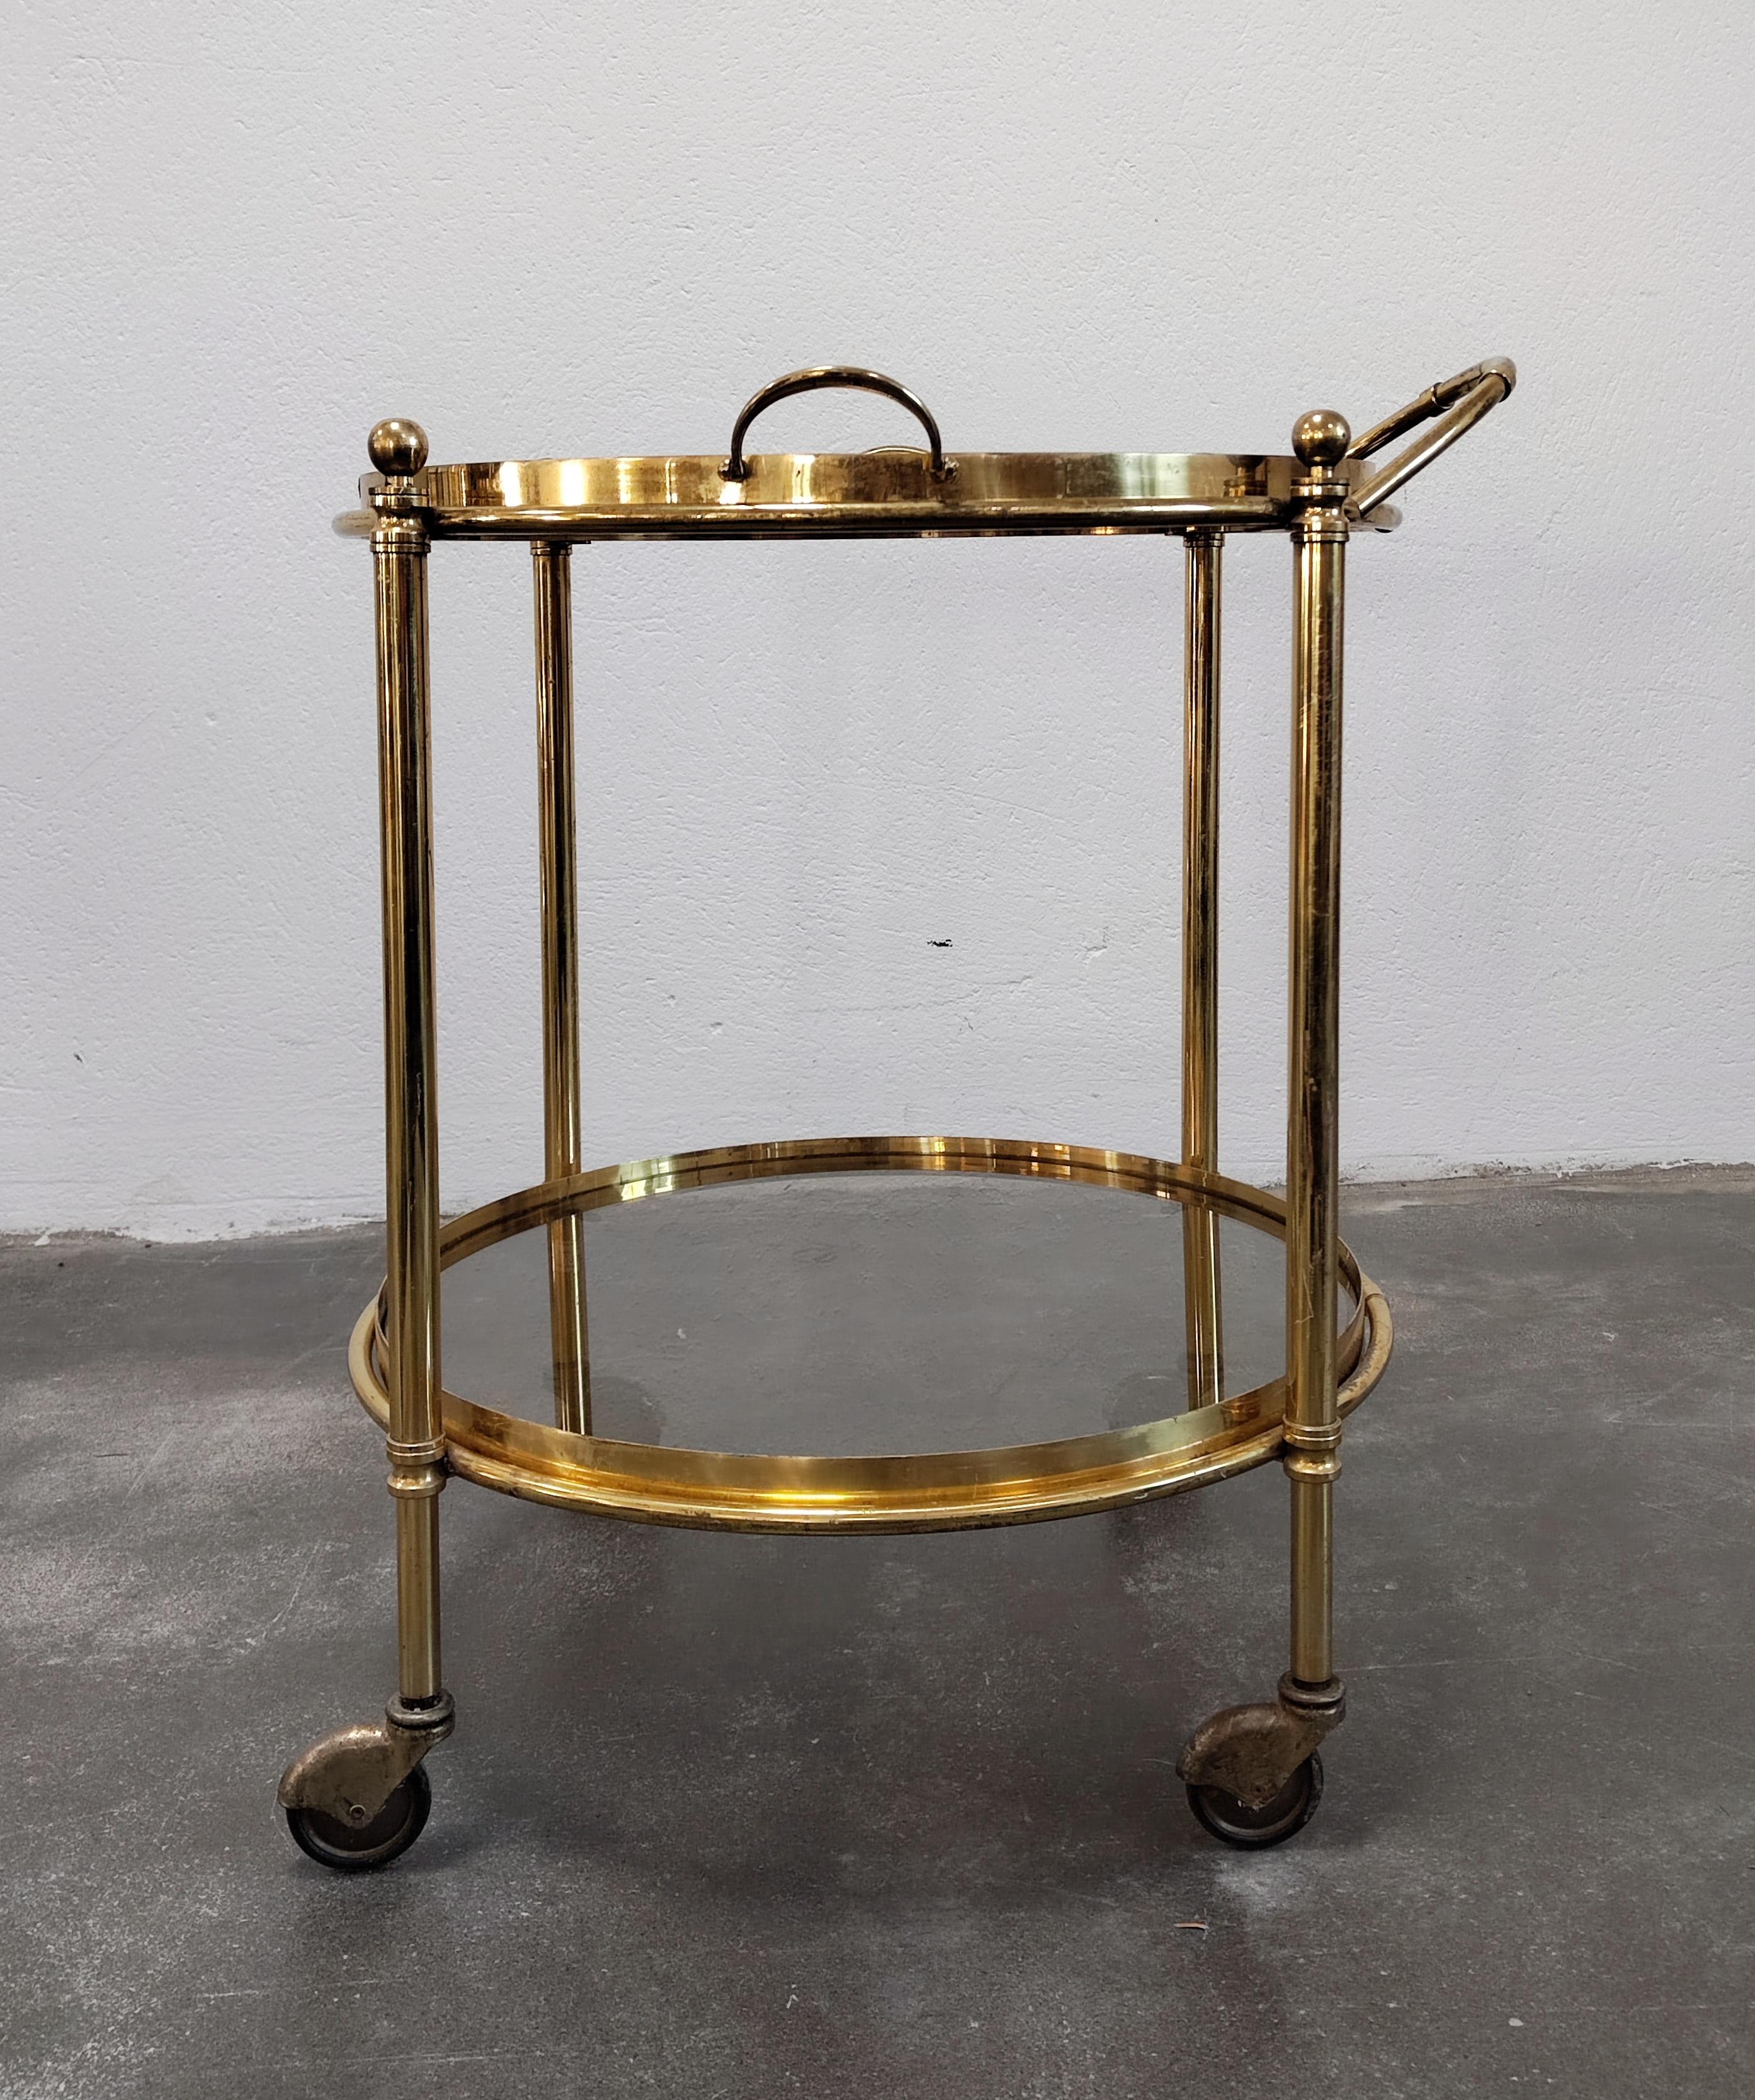 In this listing you will find a gorgeous and luxurious Hollywood Regency 2-tier bar cart done in bronze, with smoked glass boards. The top tier can be taken off and used as a serving tray, as seen in one of the pictures. Made in France in